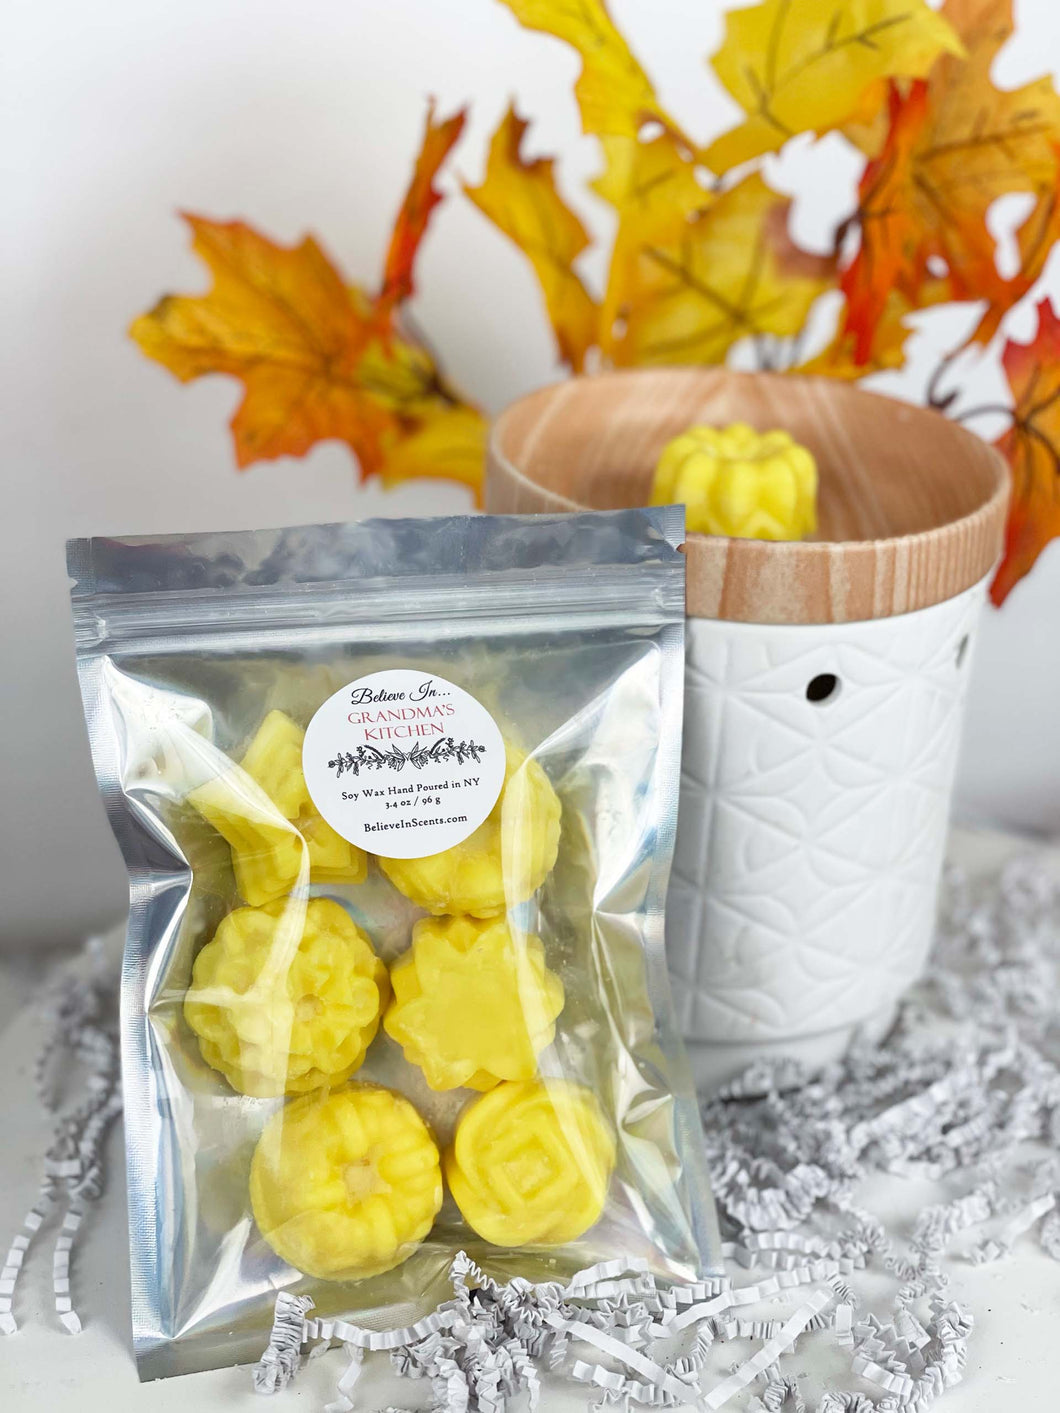 Baked goods Scented Wax Melt Shapes